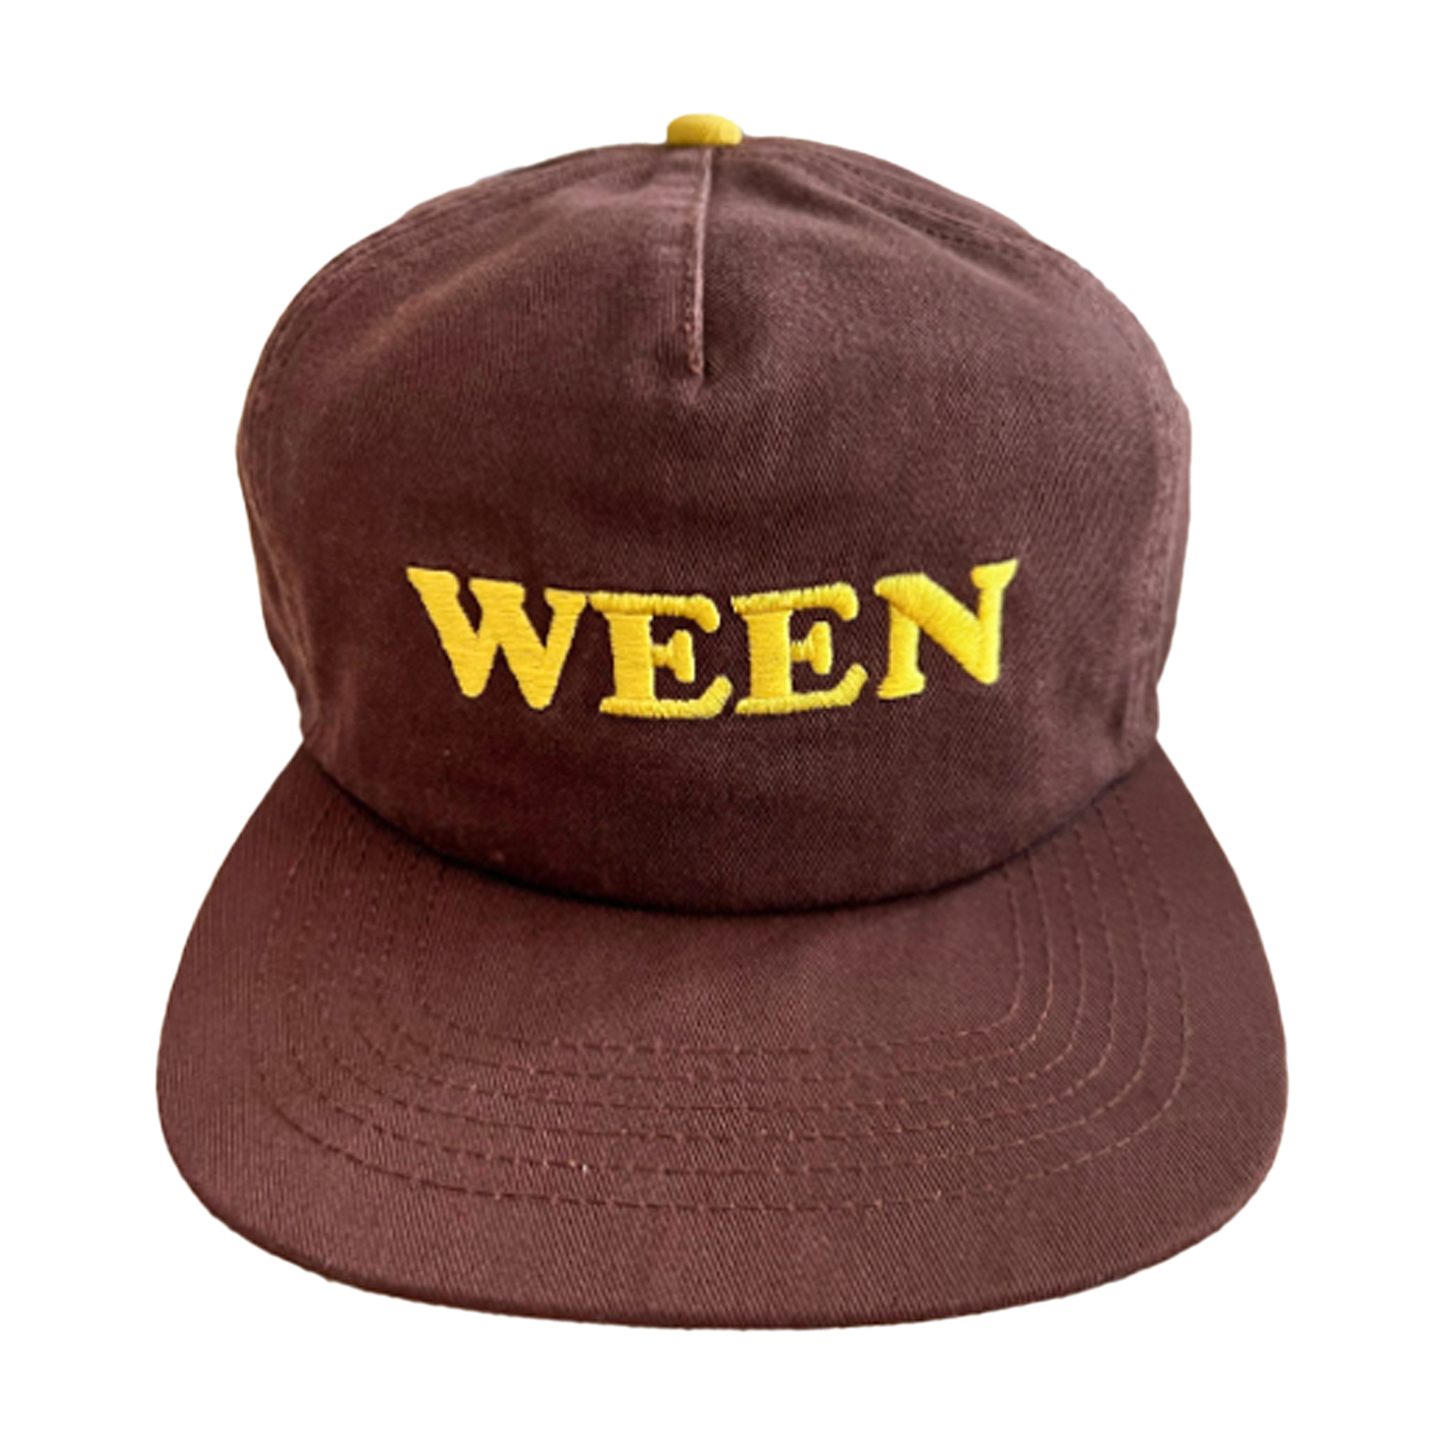 Ween Embroidered Snapback Hat